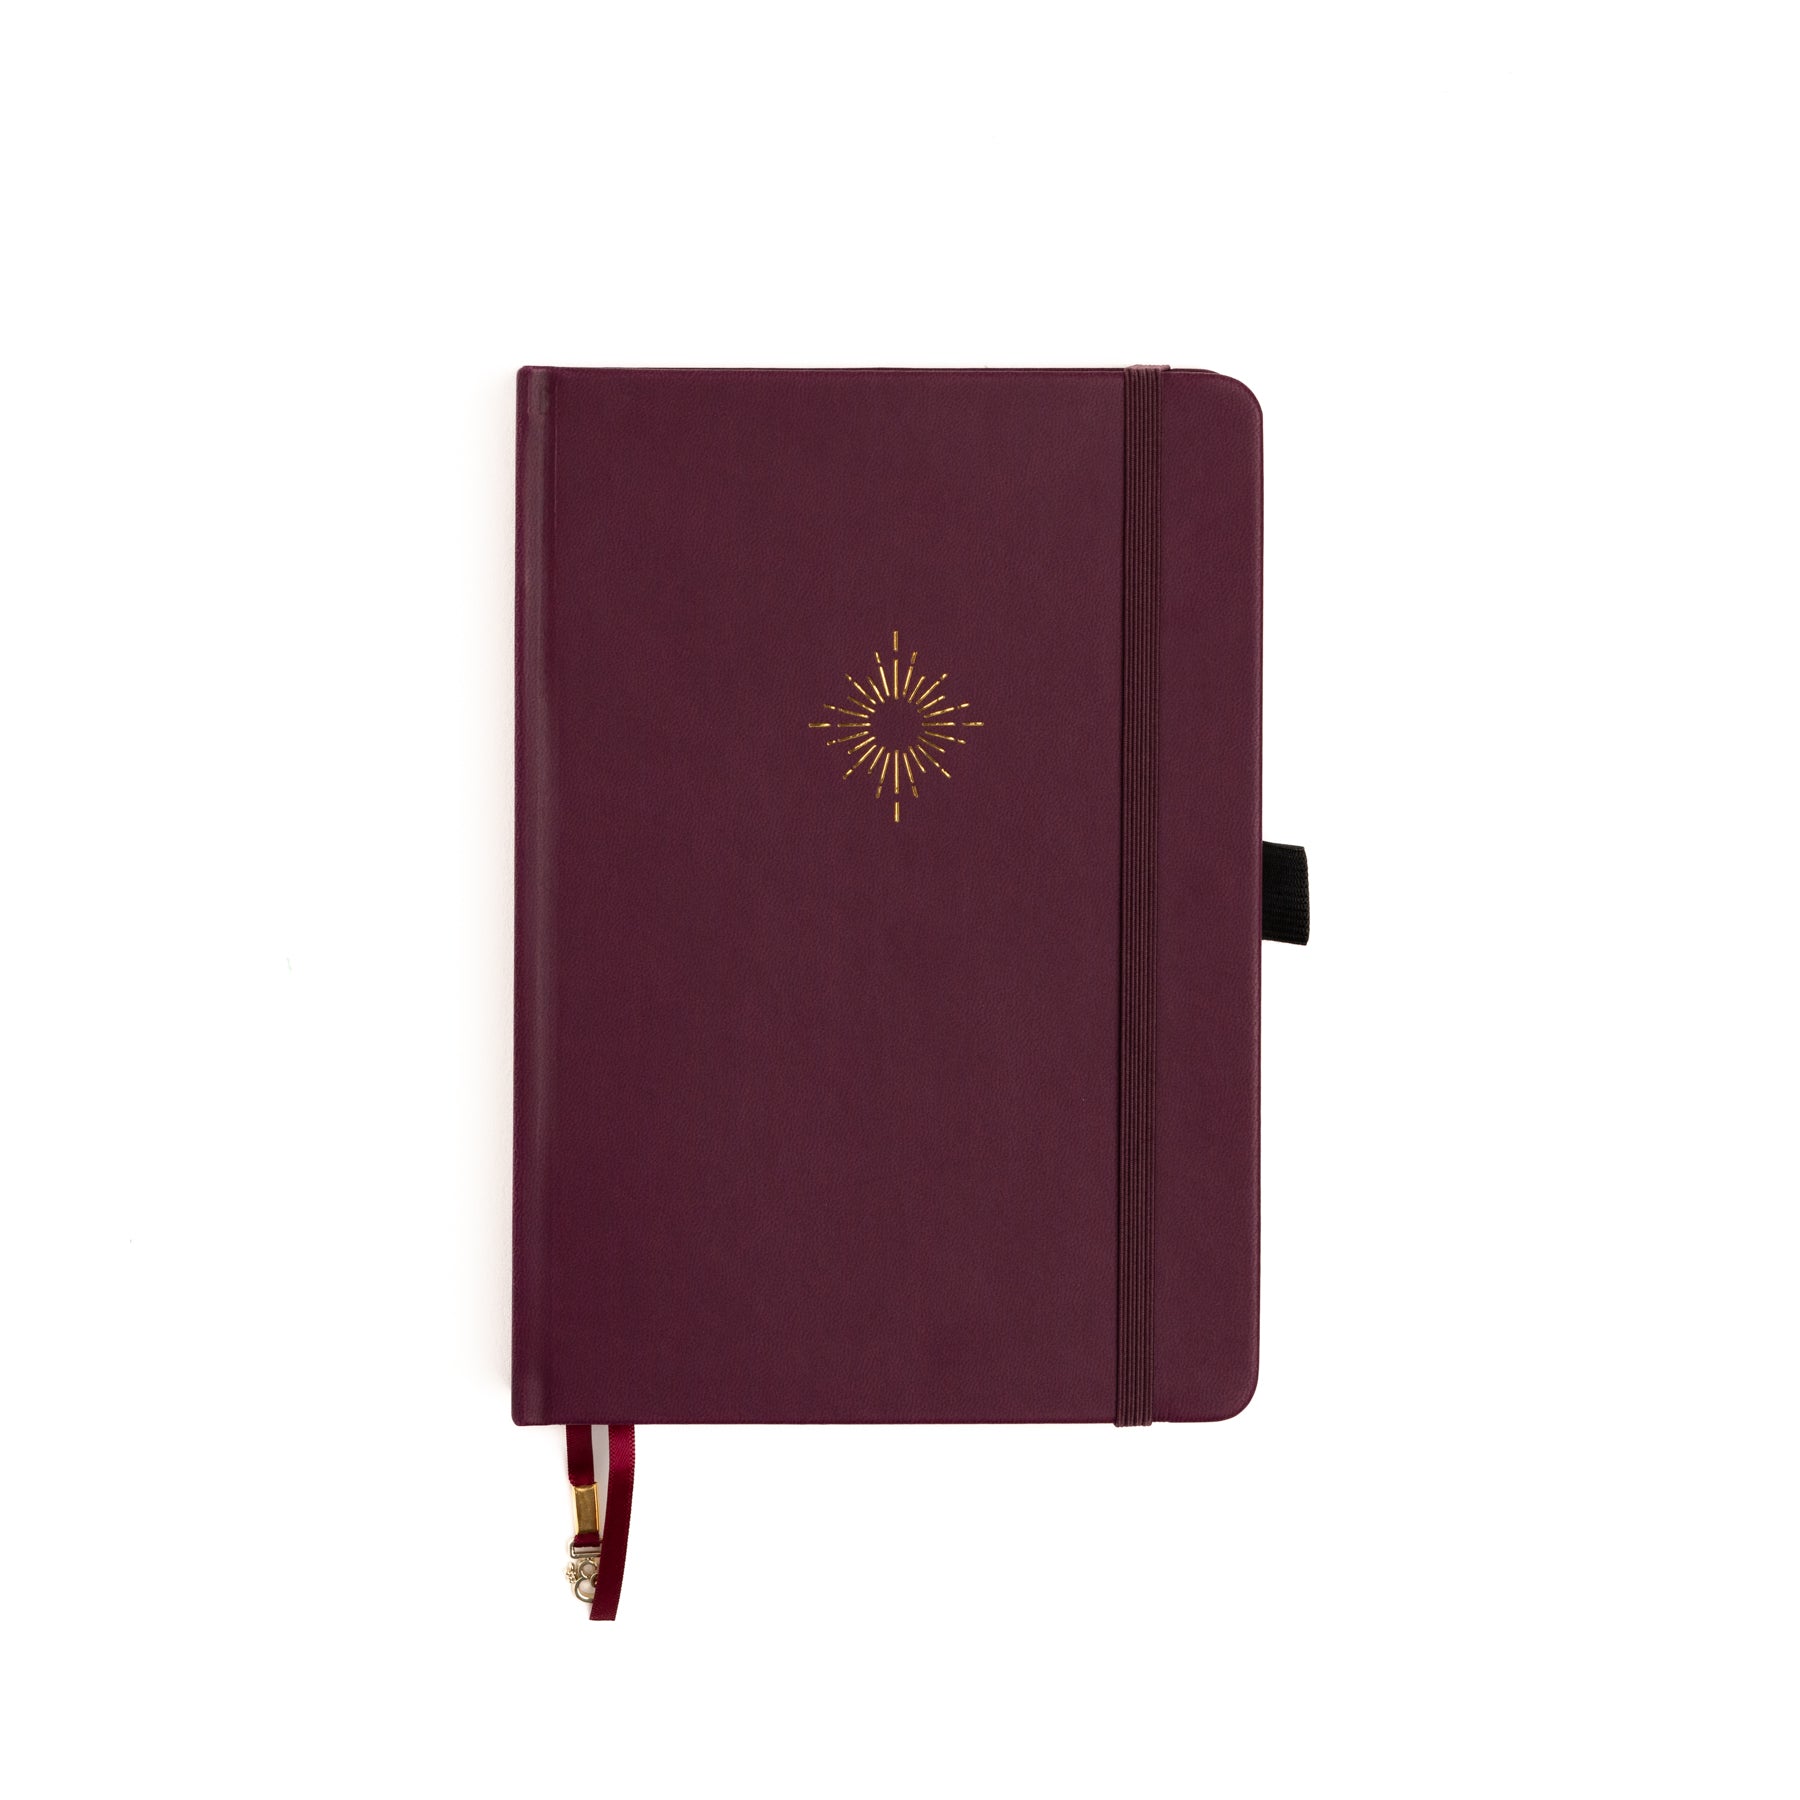 North Star Dot Grid Notebook by Archer and Olive